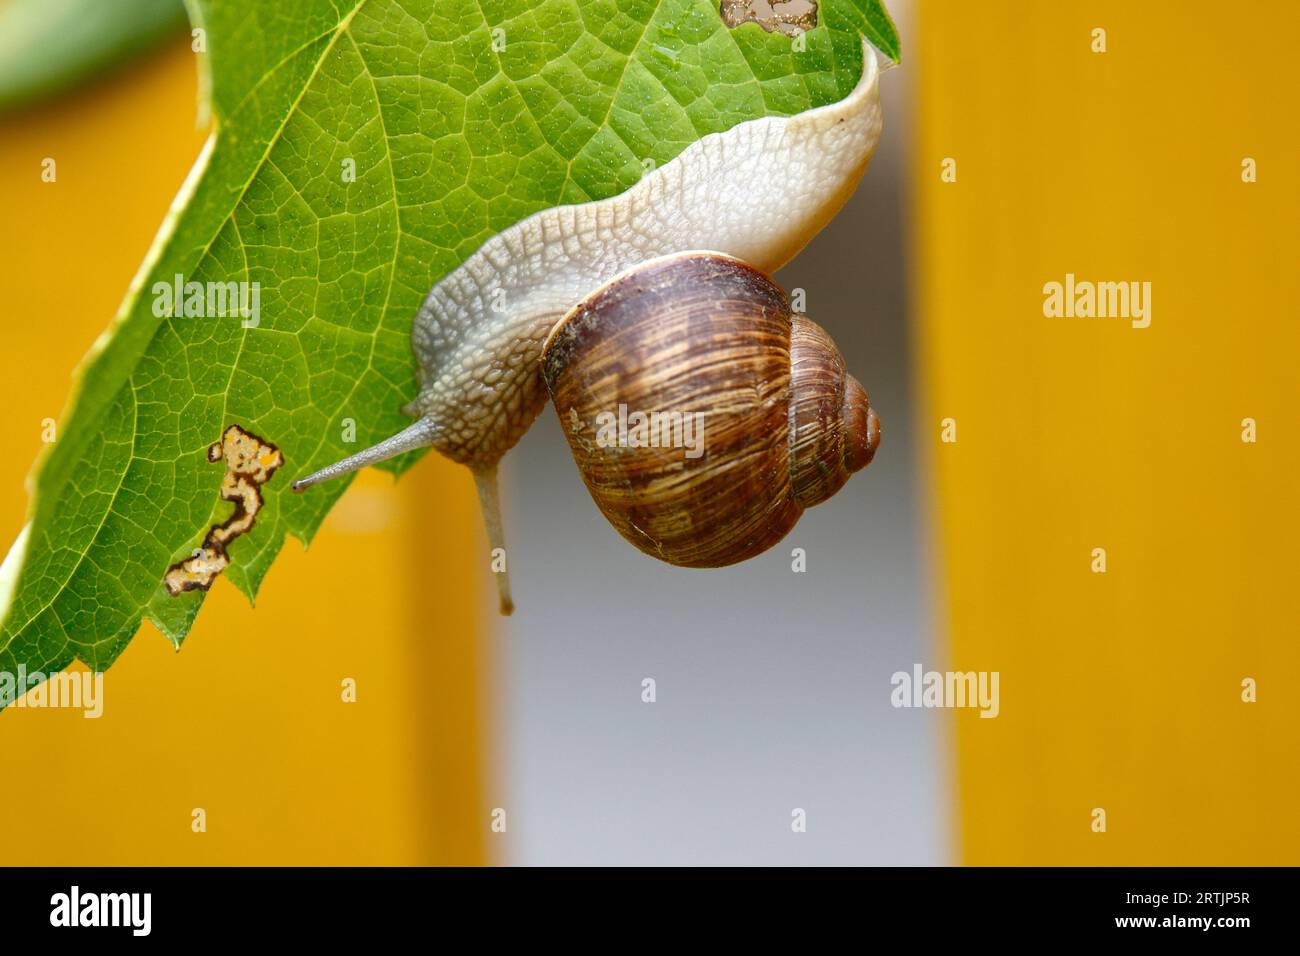 A vineyard snail on the leaf of a plant Stock Photo